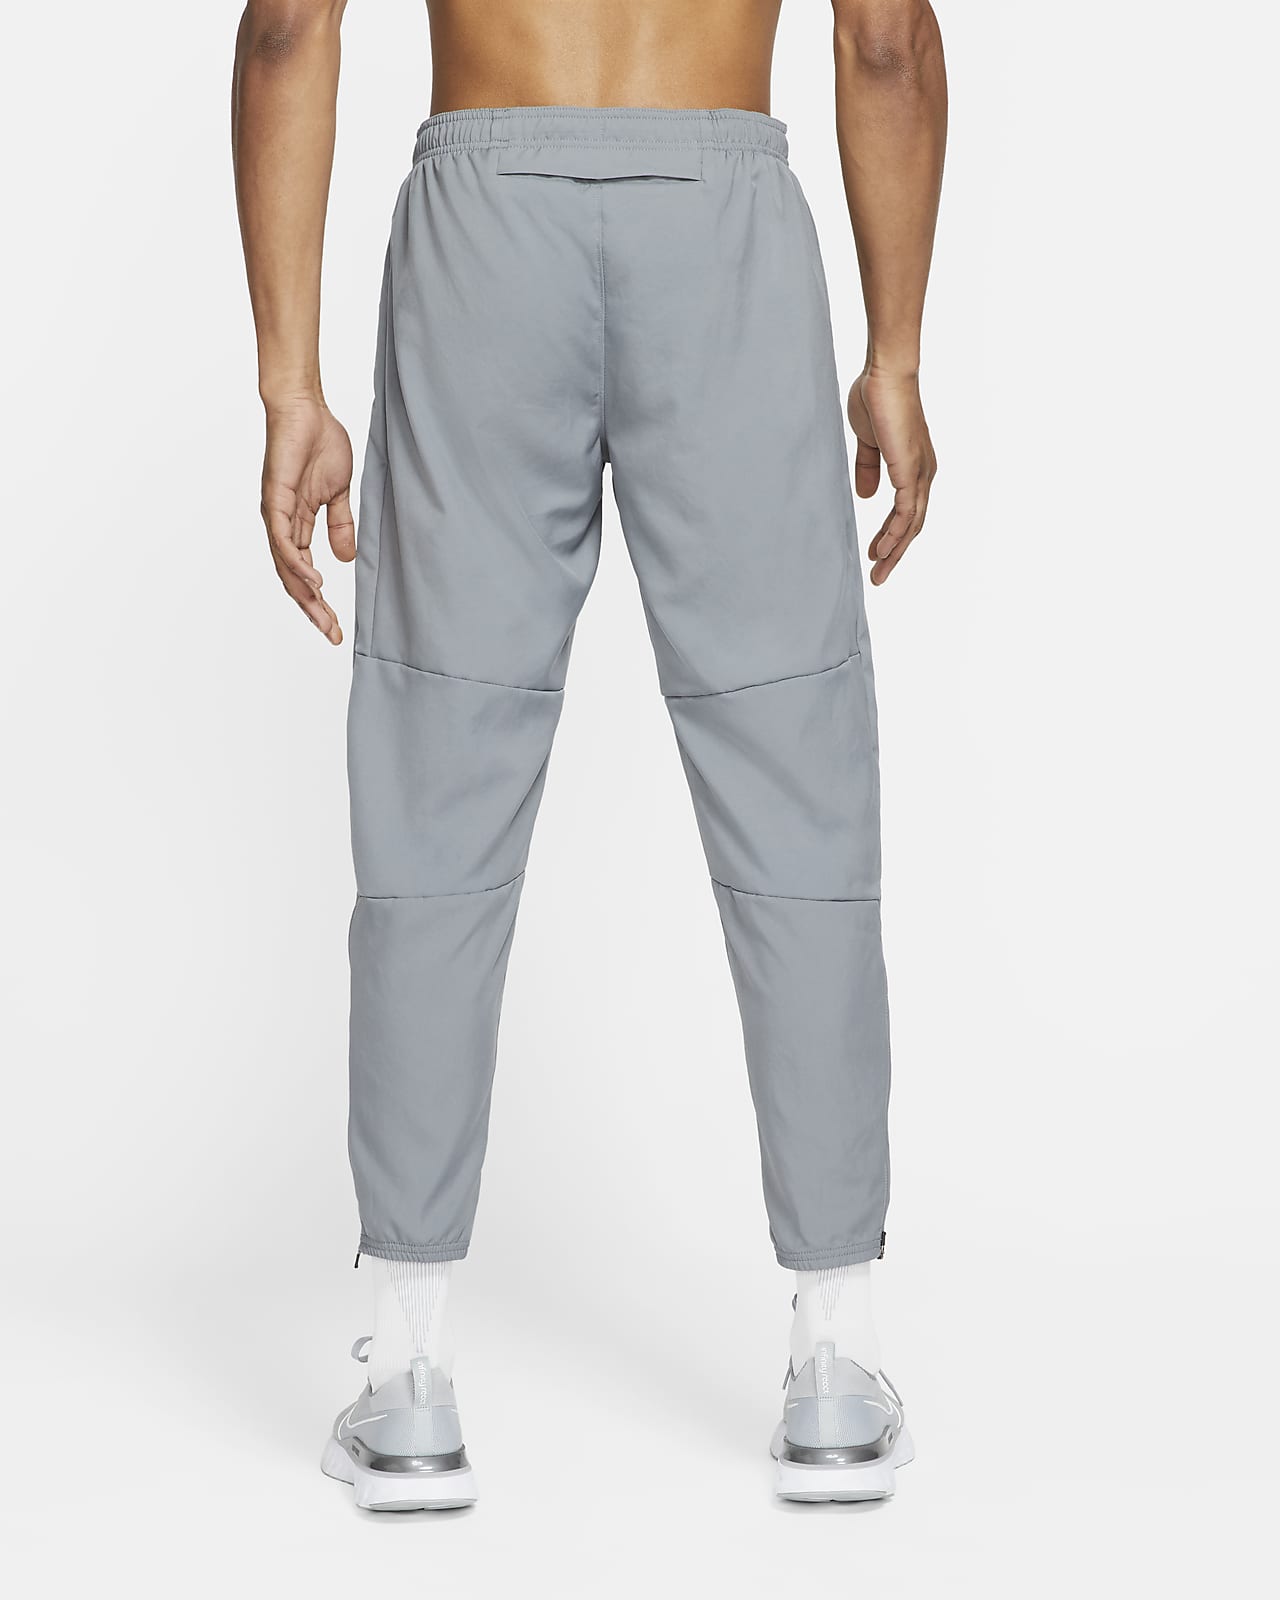 Nike Running Dri-FIT Challenger woven pants in gray